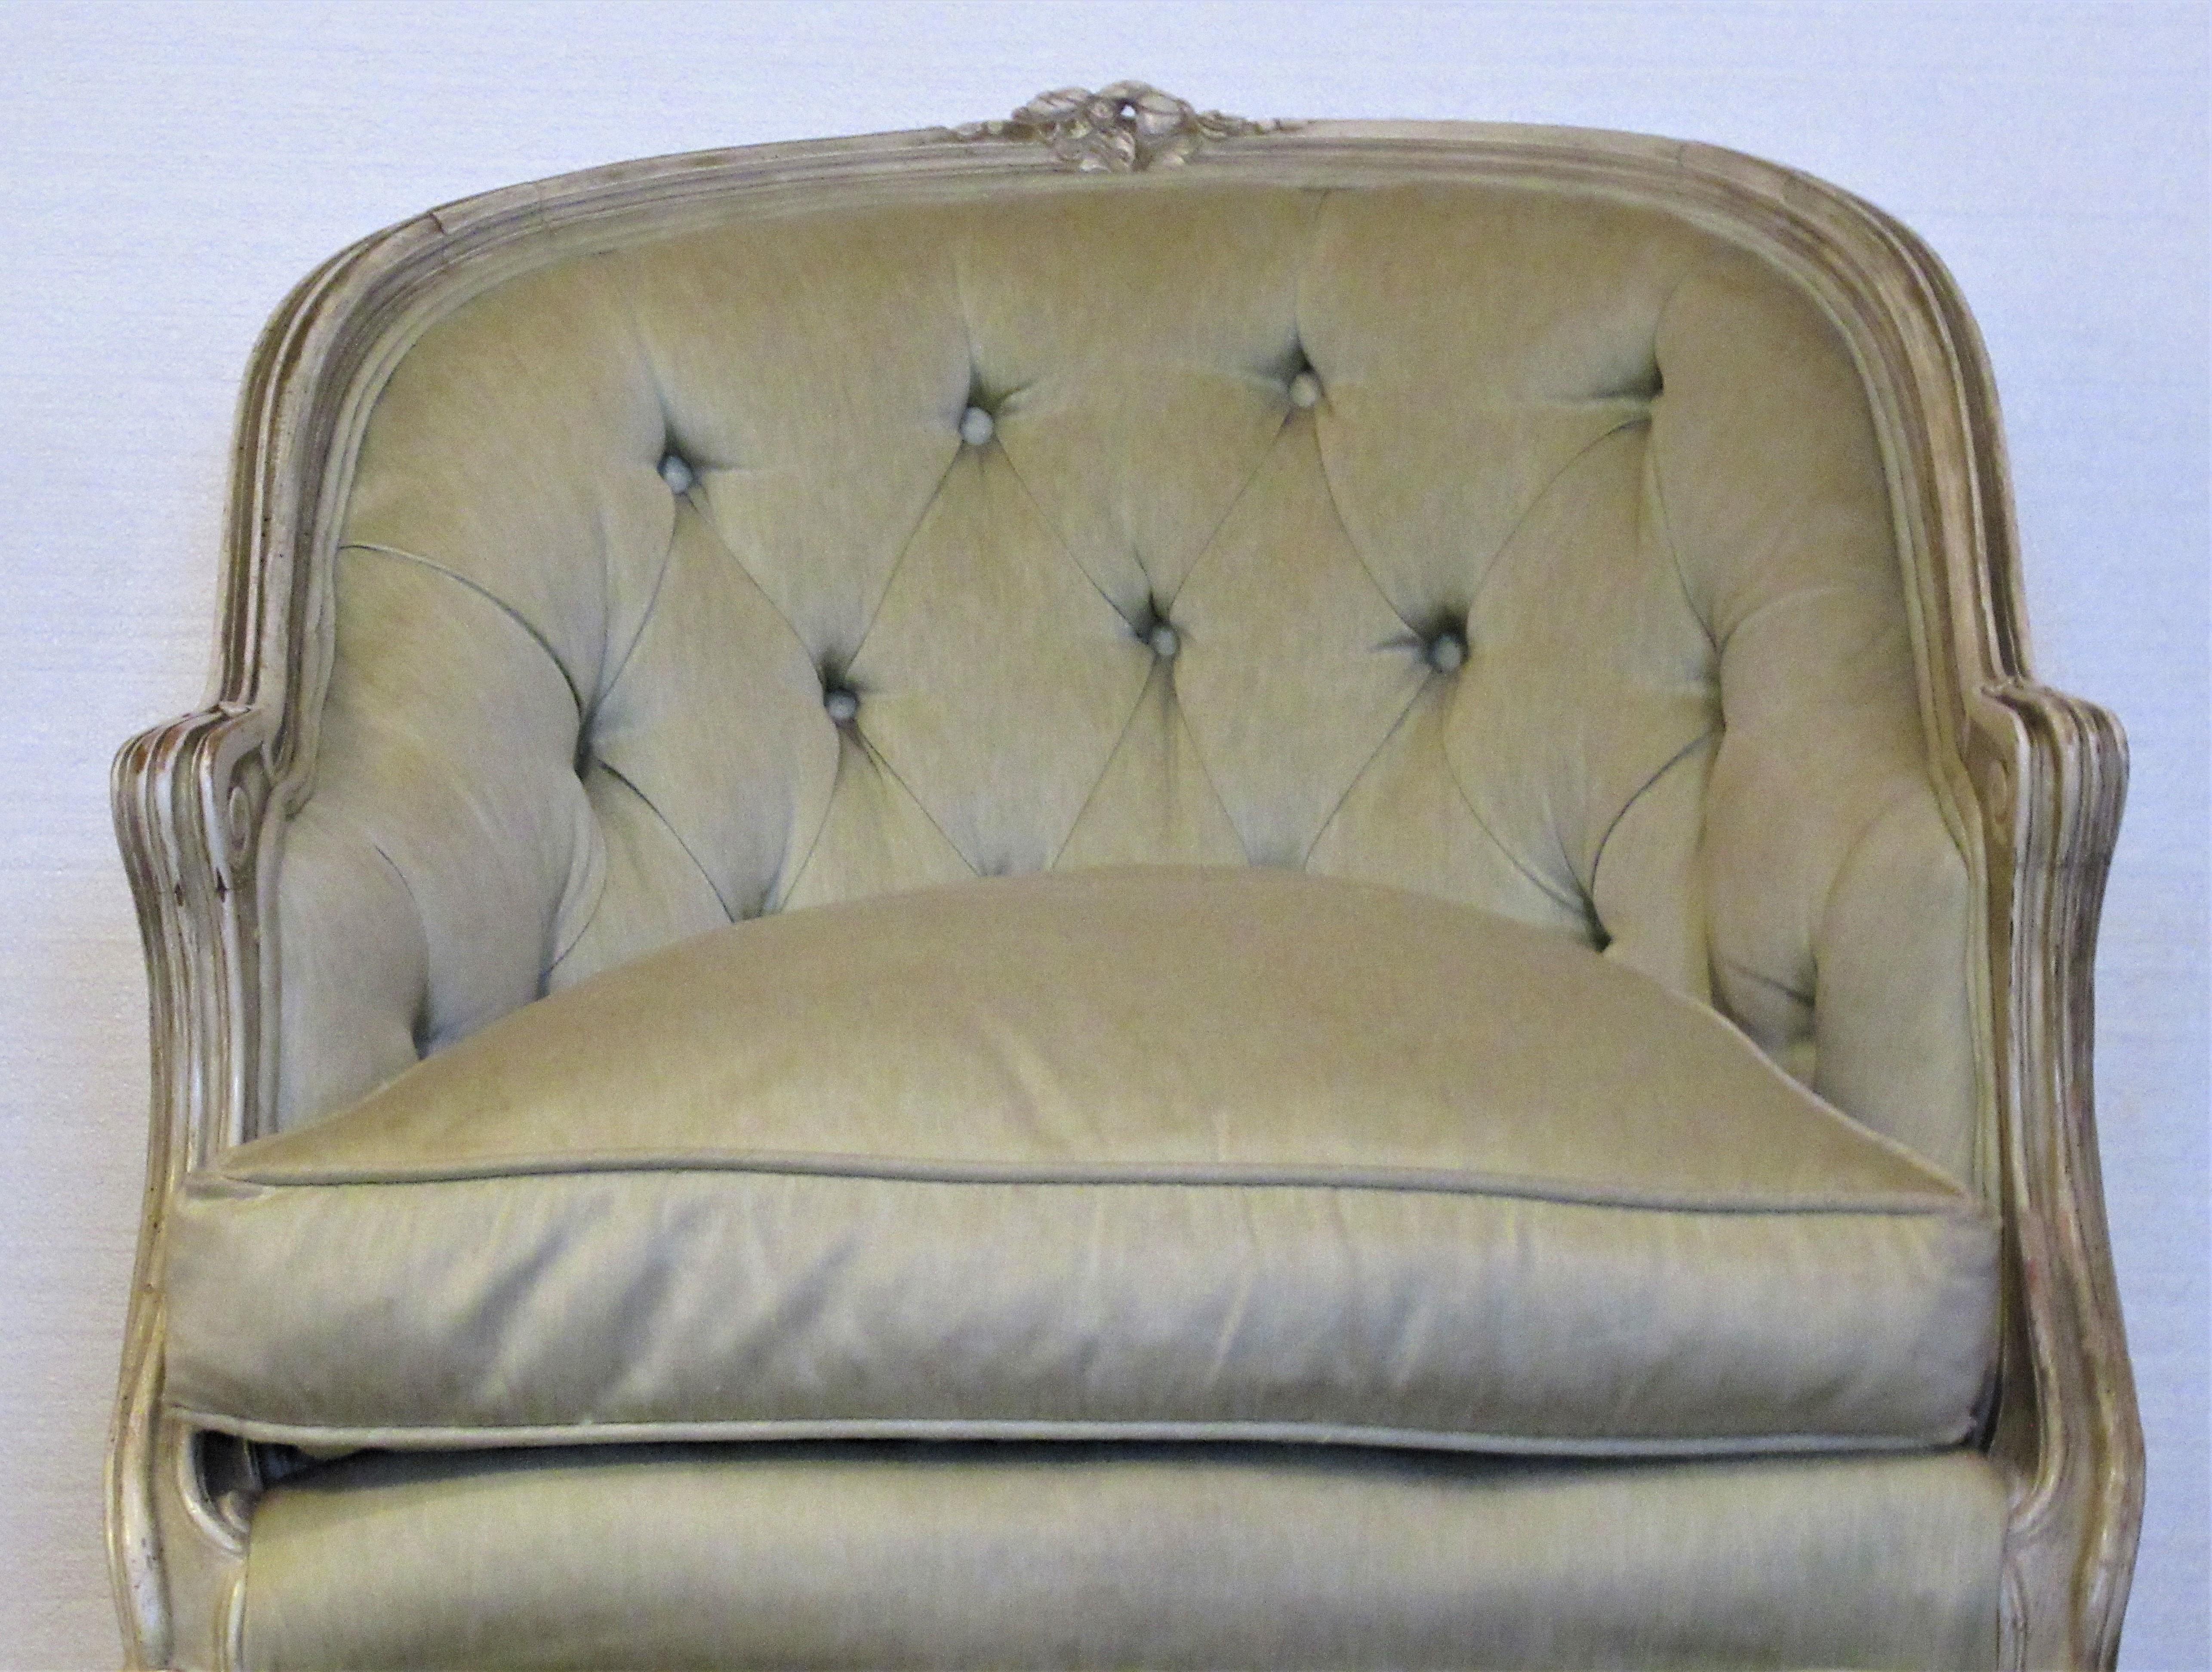 Louis XV style bergère in old cream white surface and original pale celery green upholstery with down filled seat cushion, circa 1950-1960.